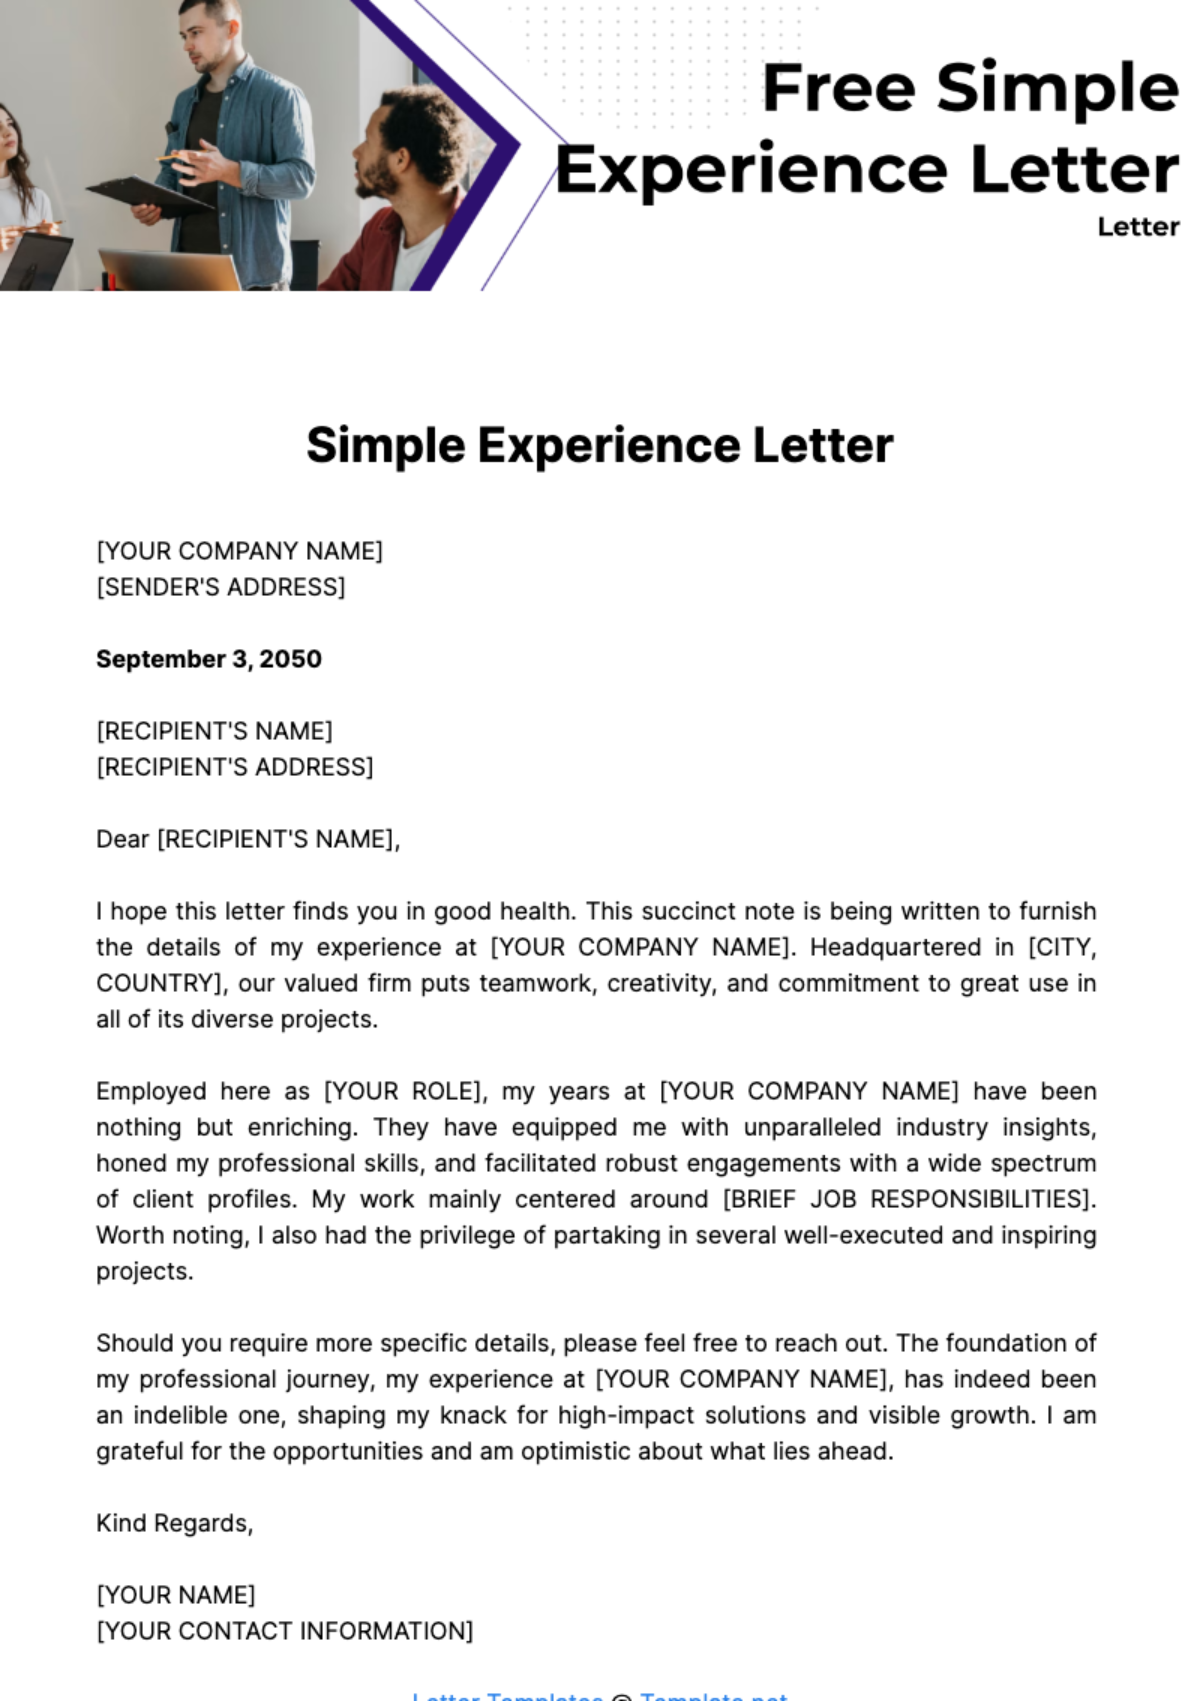 Simple Experience Letter Template